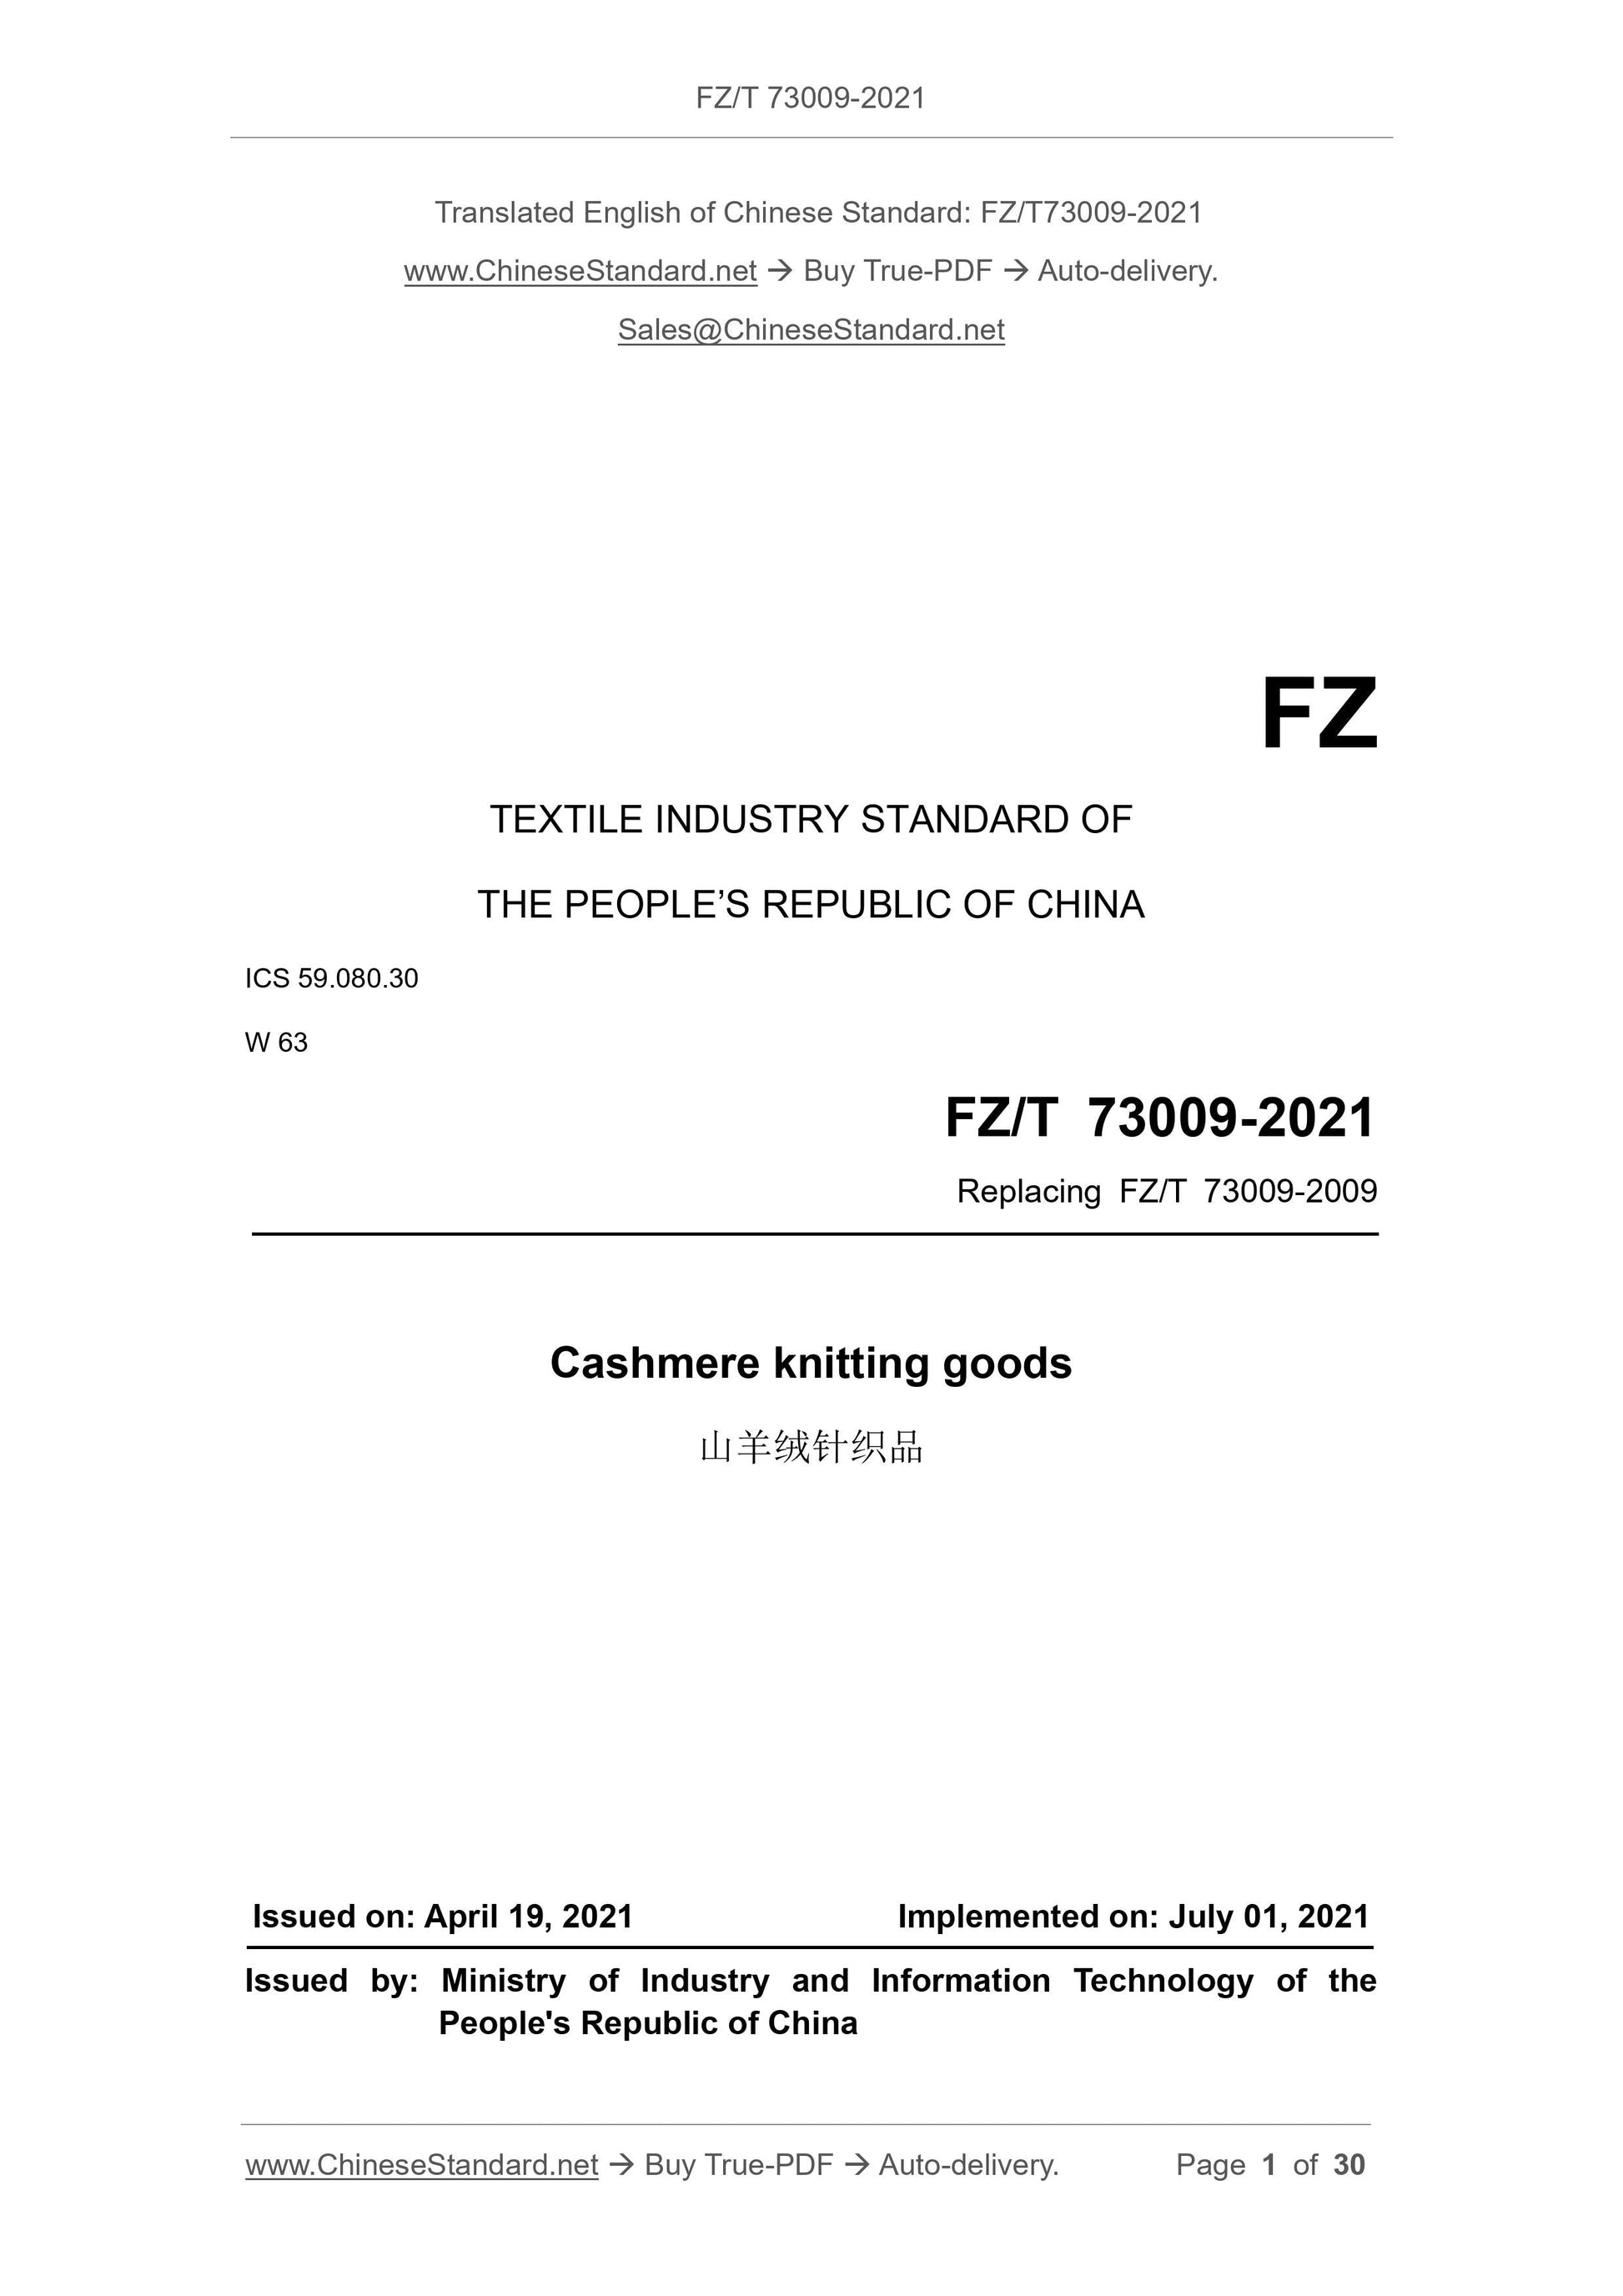 FZ/T 73009-2021 Page 1